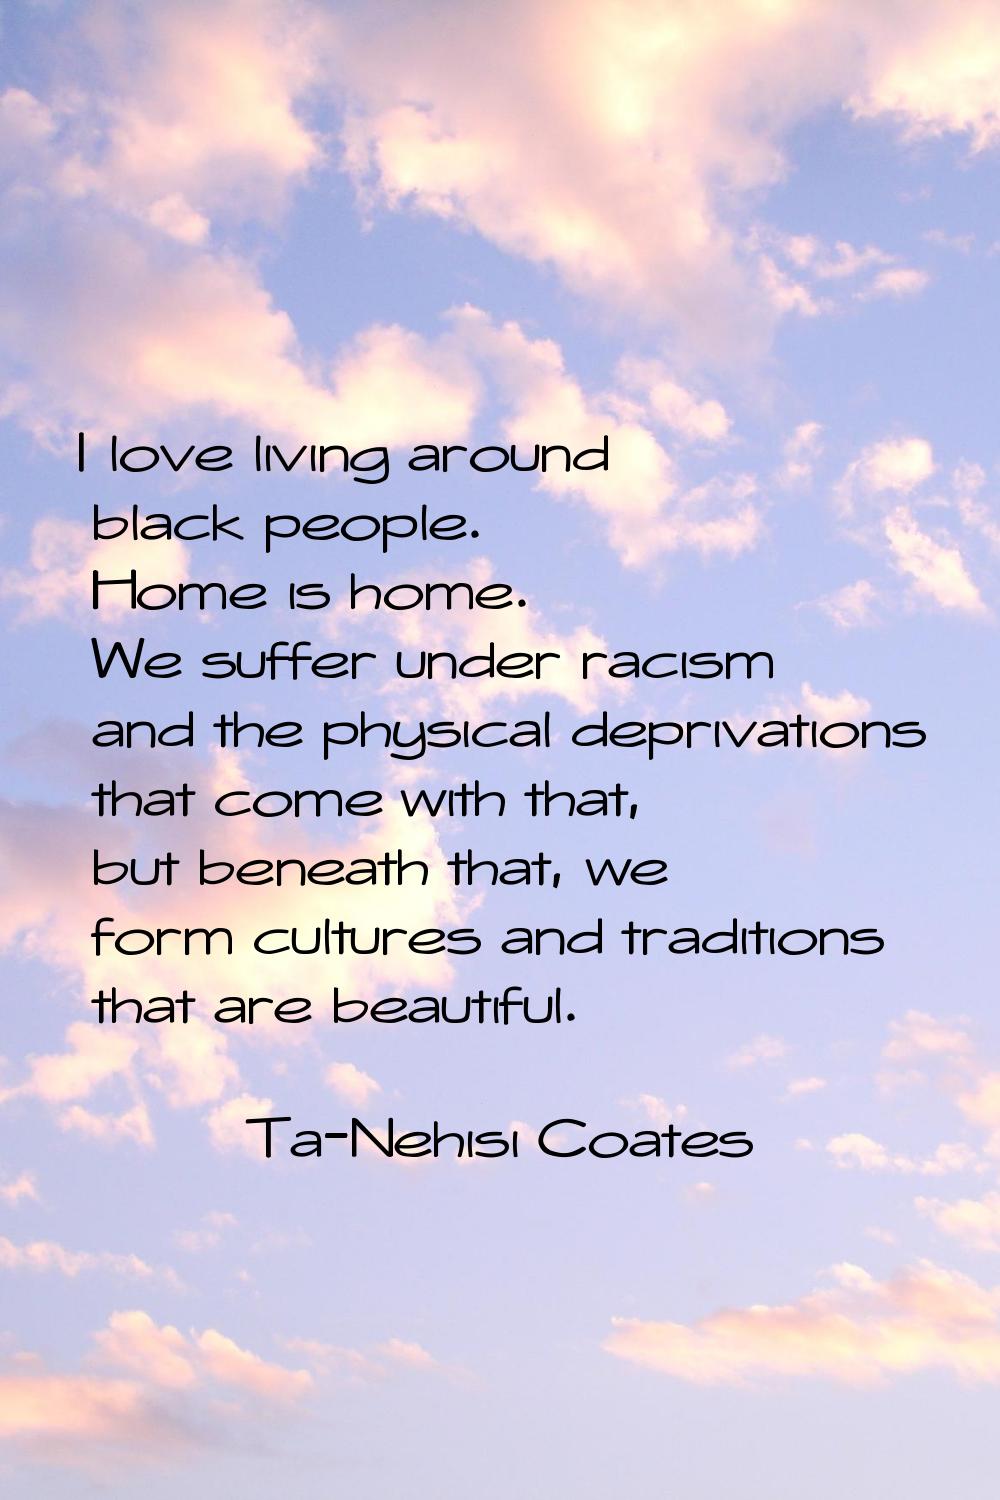 I love living around black people. Home is home. We suffer under racism and the physical deprivatio